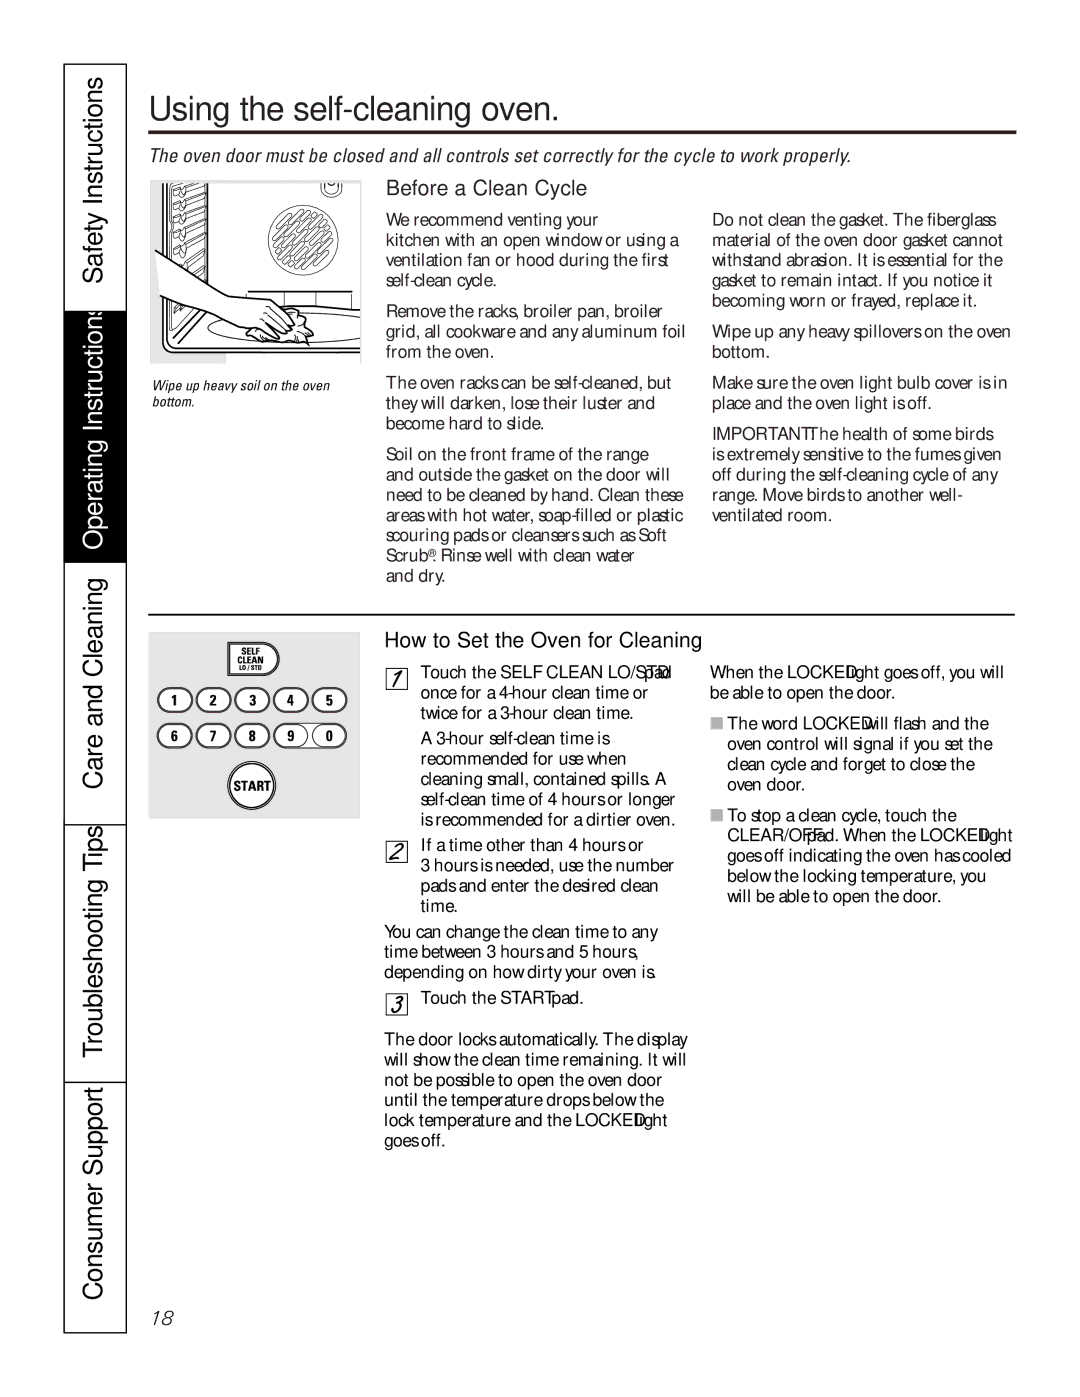 GE JGS905 owner manual Using the self-cleaning oven, Operating Instructions Safety, Before a Clean Cycle 